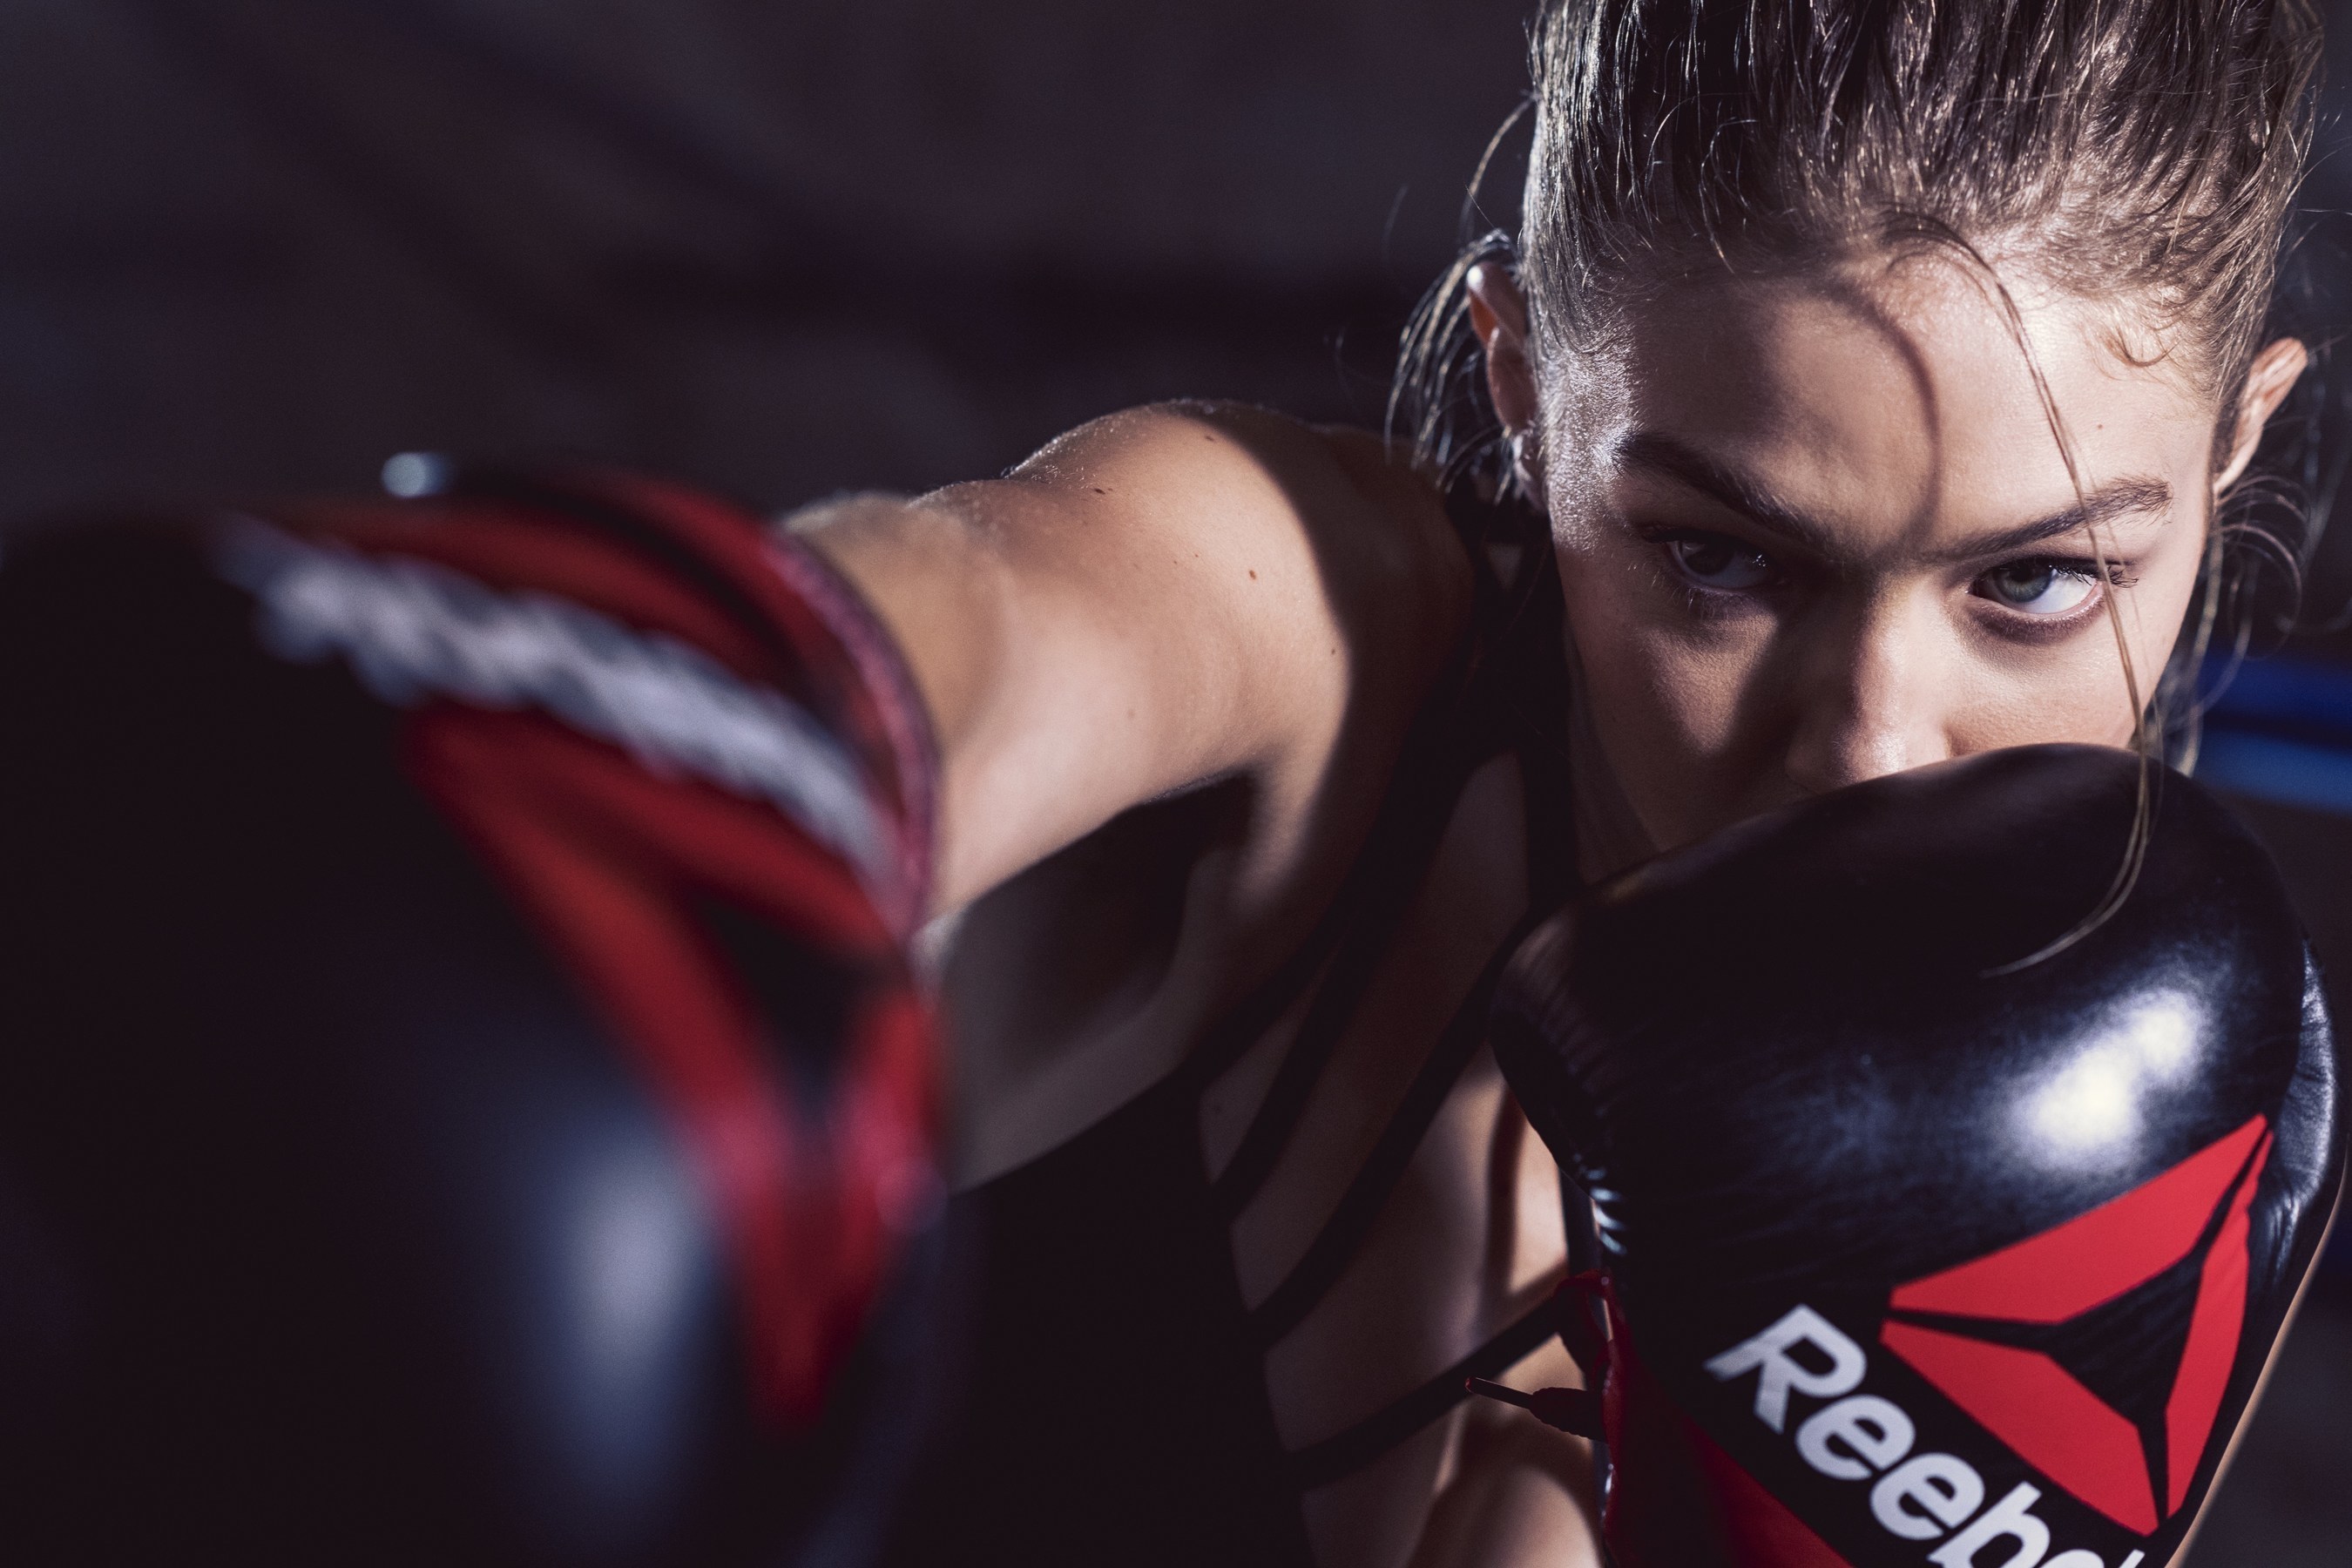 GIGI HADID JOINS FORCES WITH REEBOK TO TELL NEXT PHASE OF BE MORE HUMAN CAMPAIGN